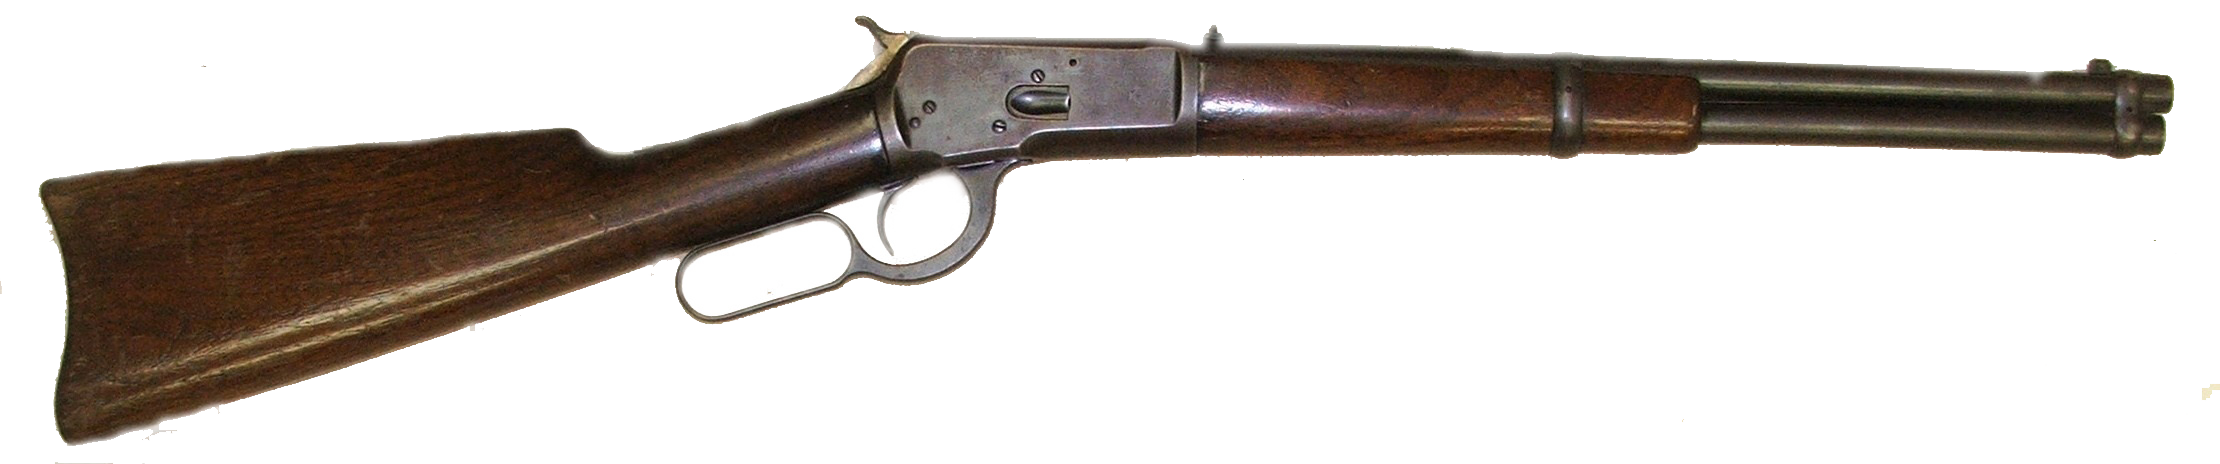 Robert Eager Bobo's .44-40 Winchester lever action carbine